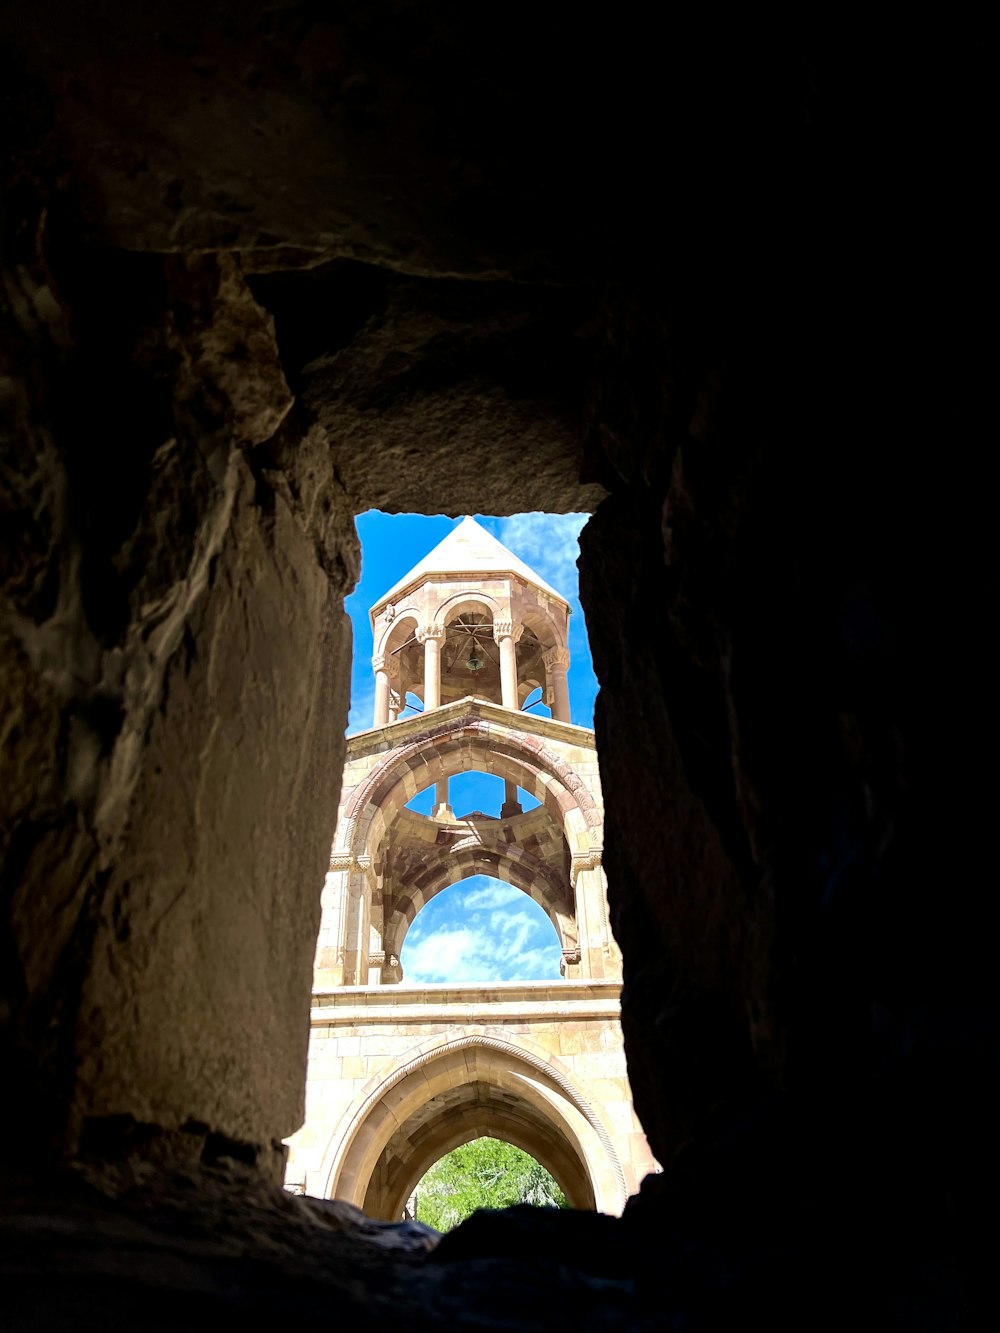 a view of a clock tower through a cave